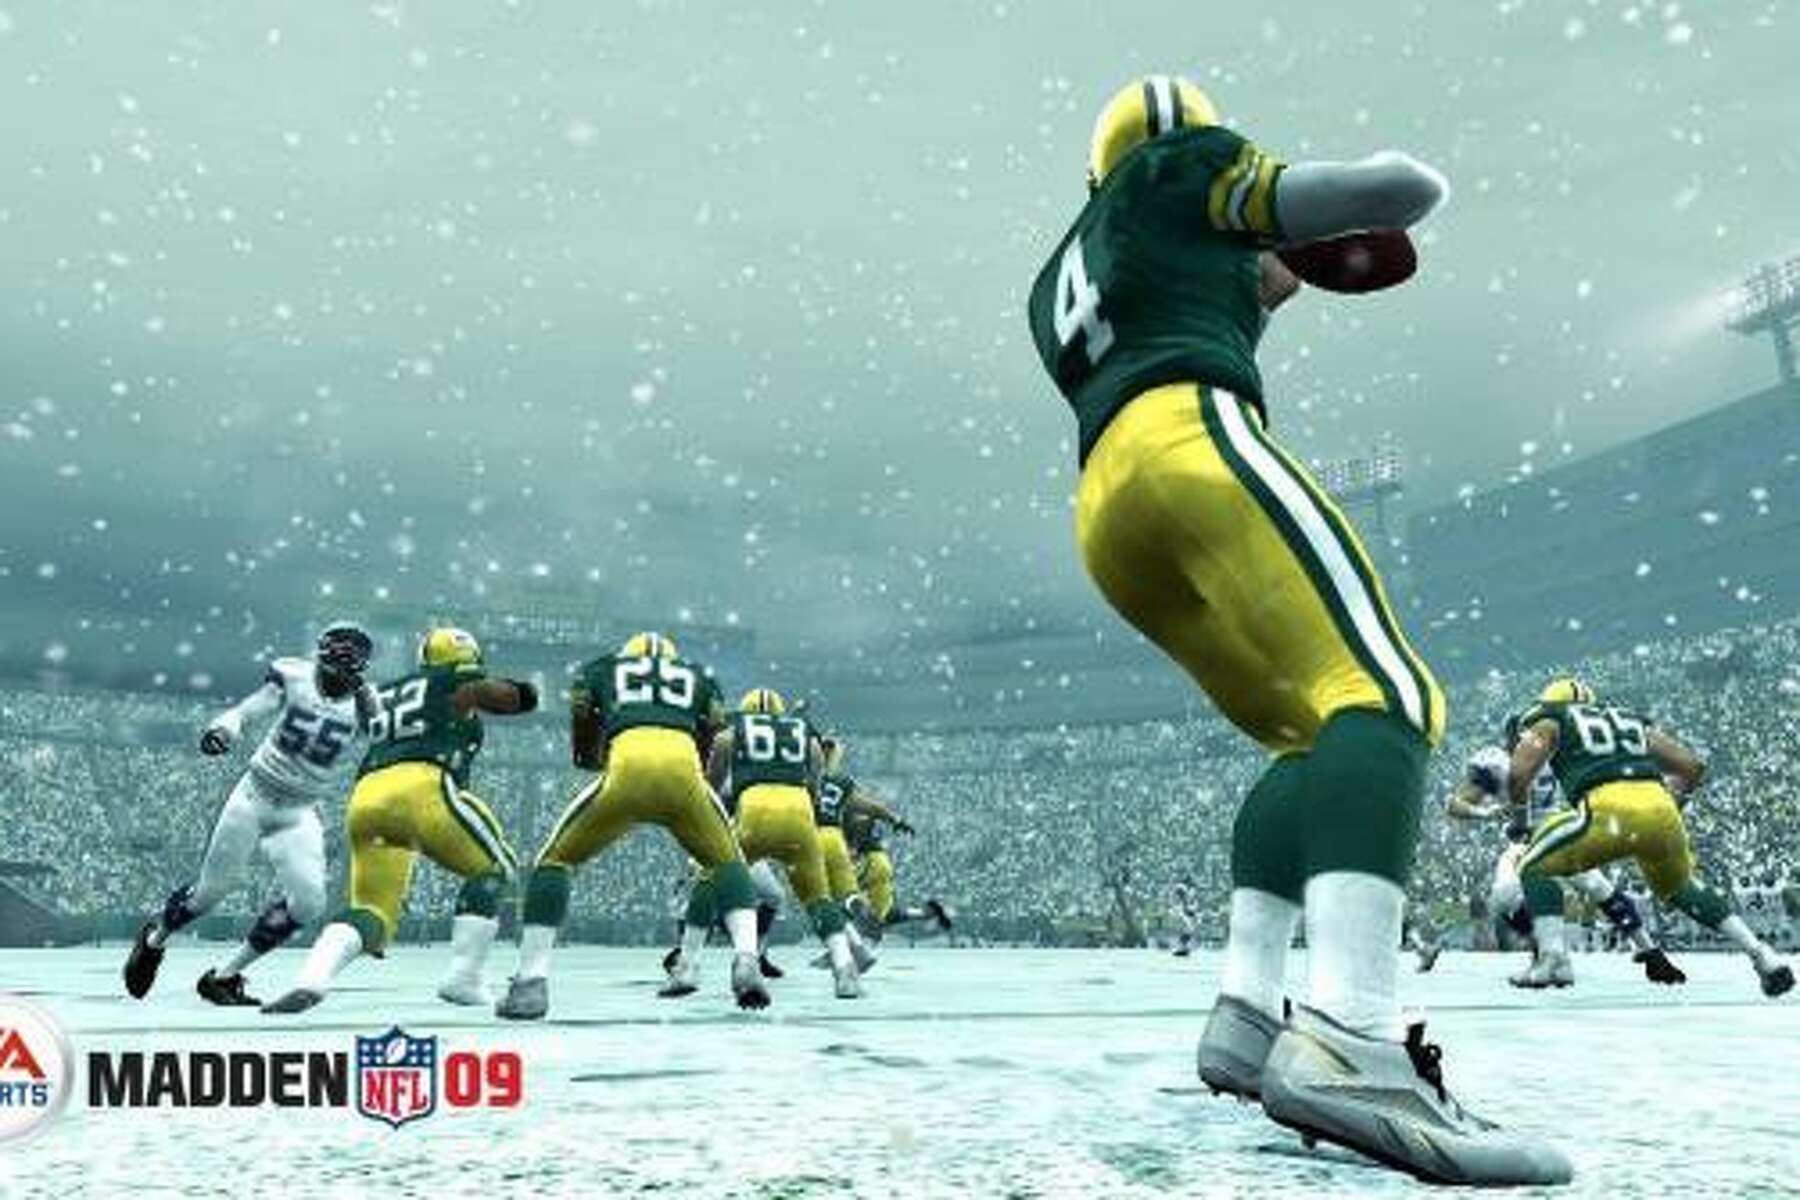 Review: After 20 years, Madden still has game